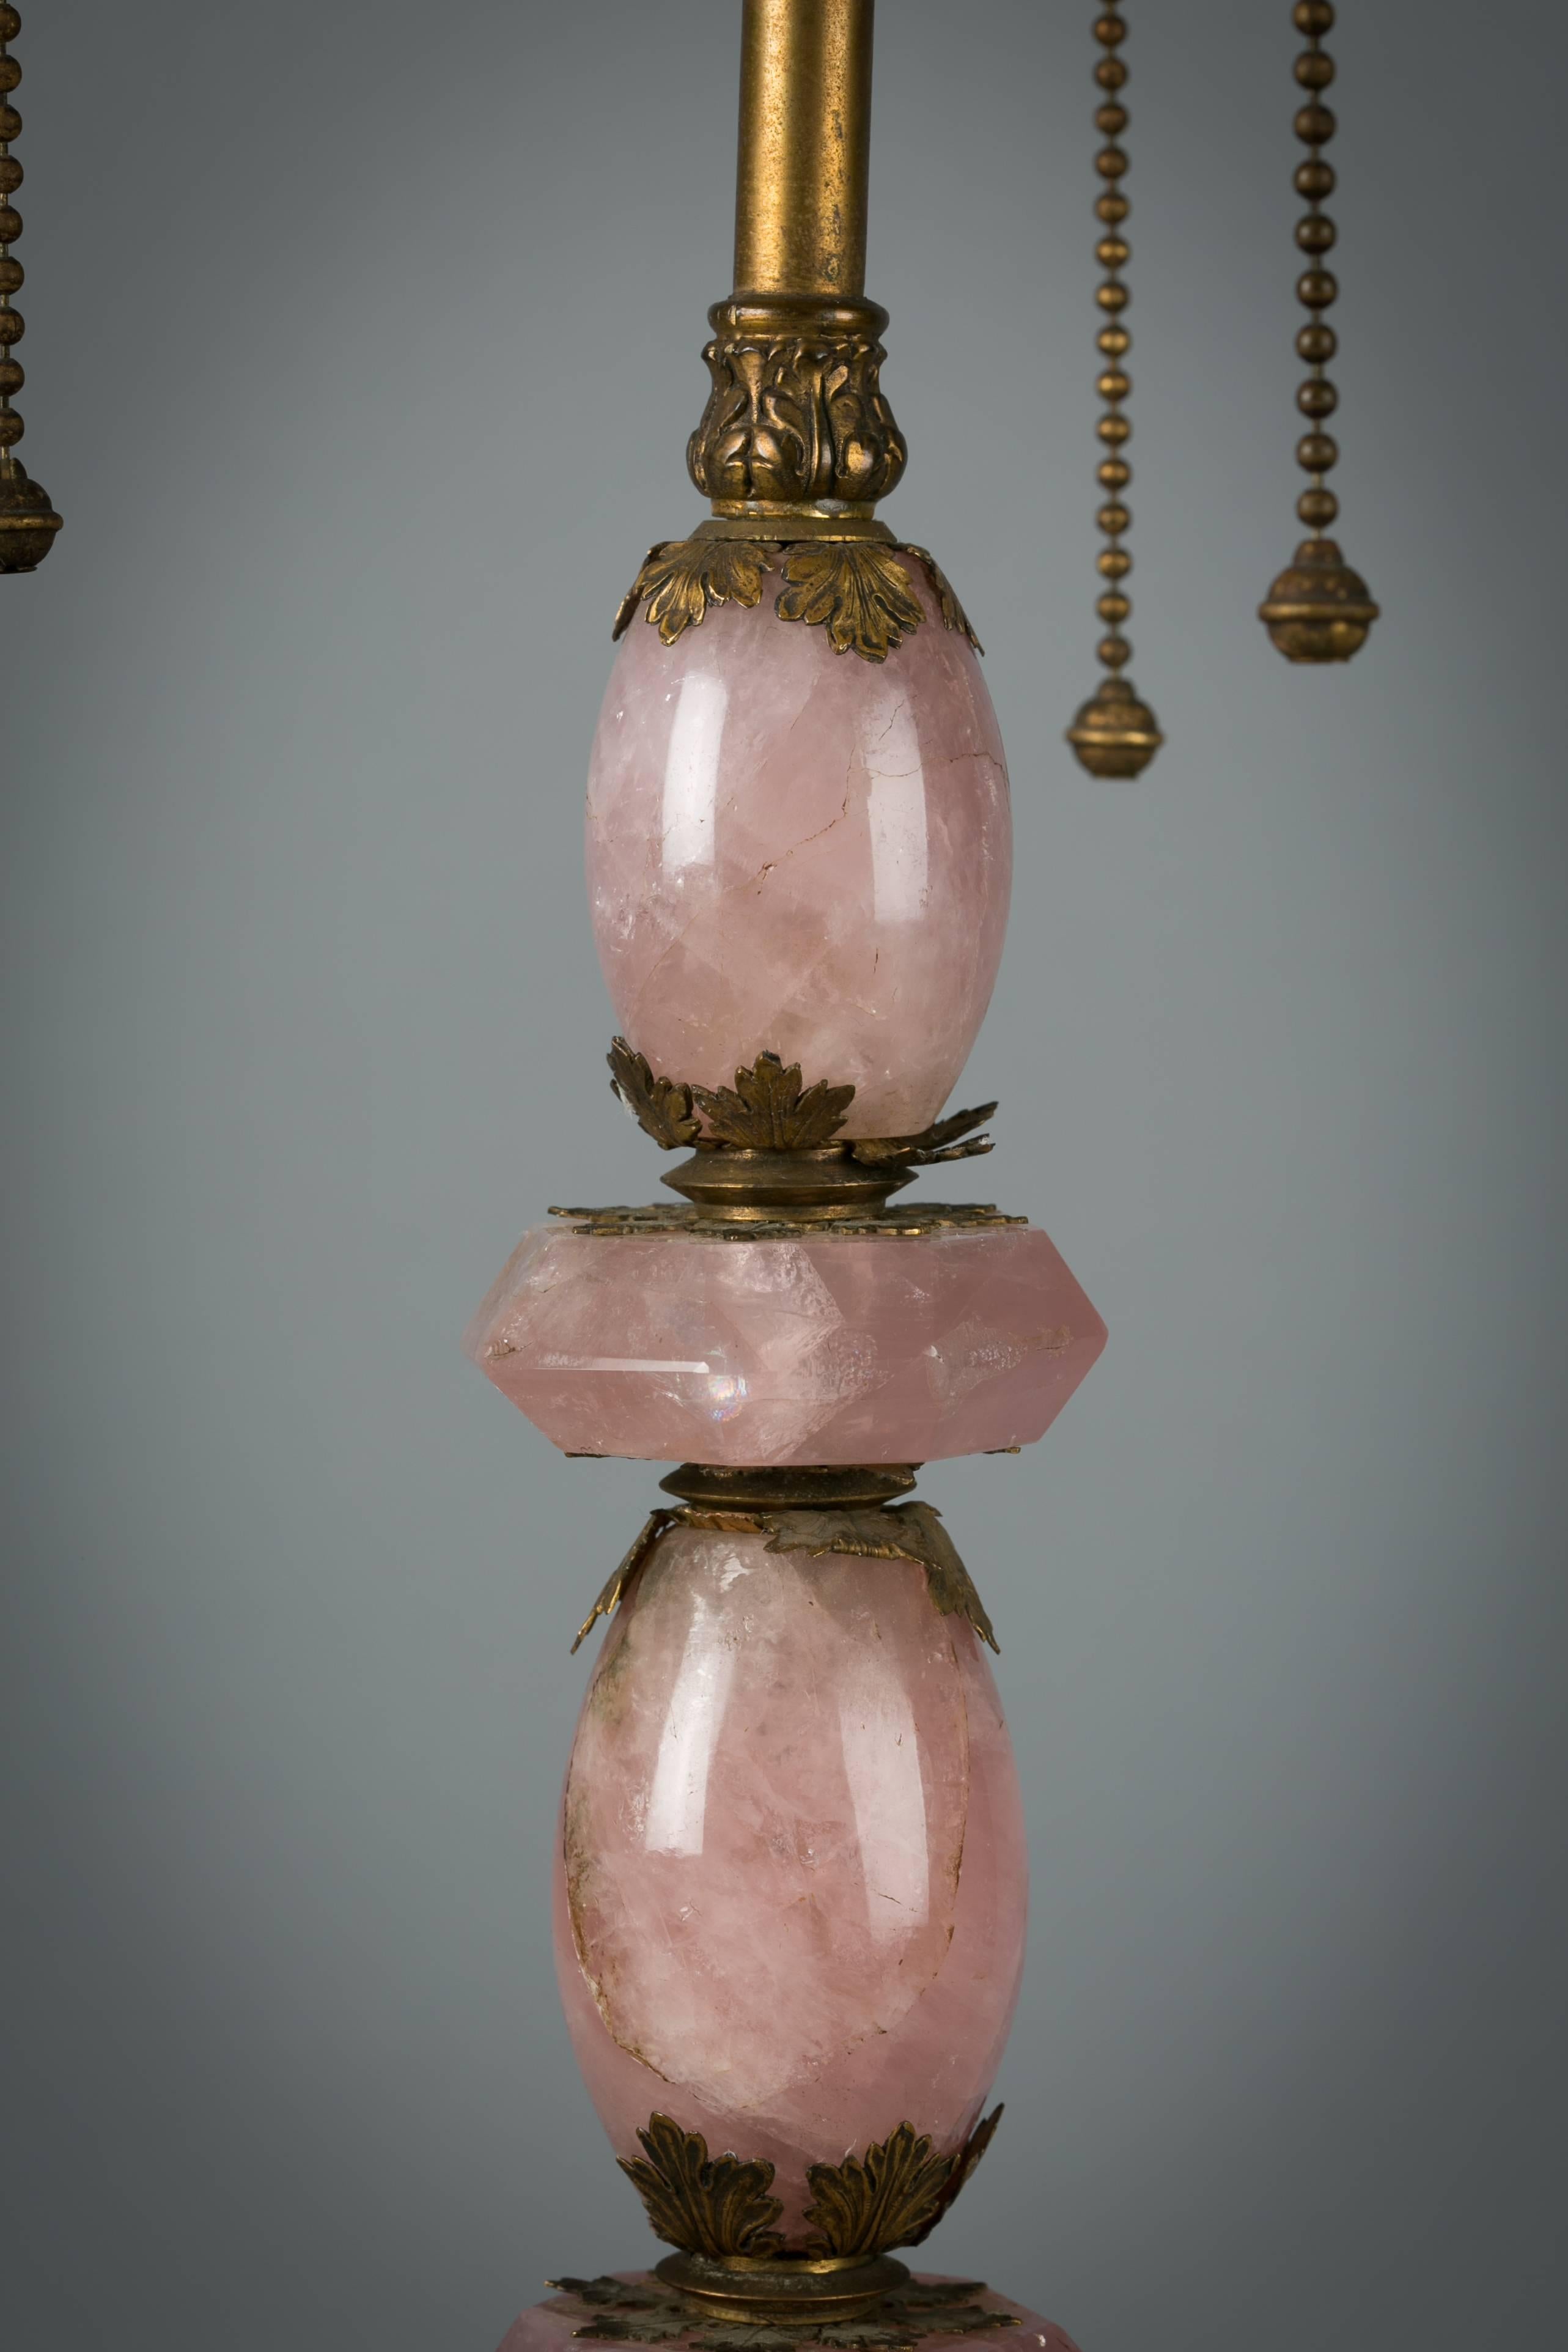 American bronze and rose quartz lamp, circa 1900. Made by E.F. Caldwell and Co.